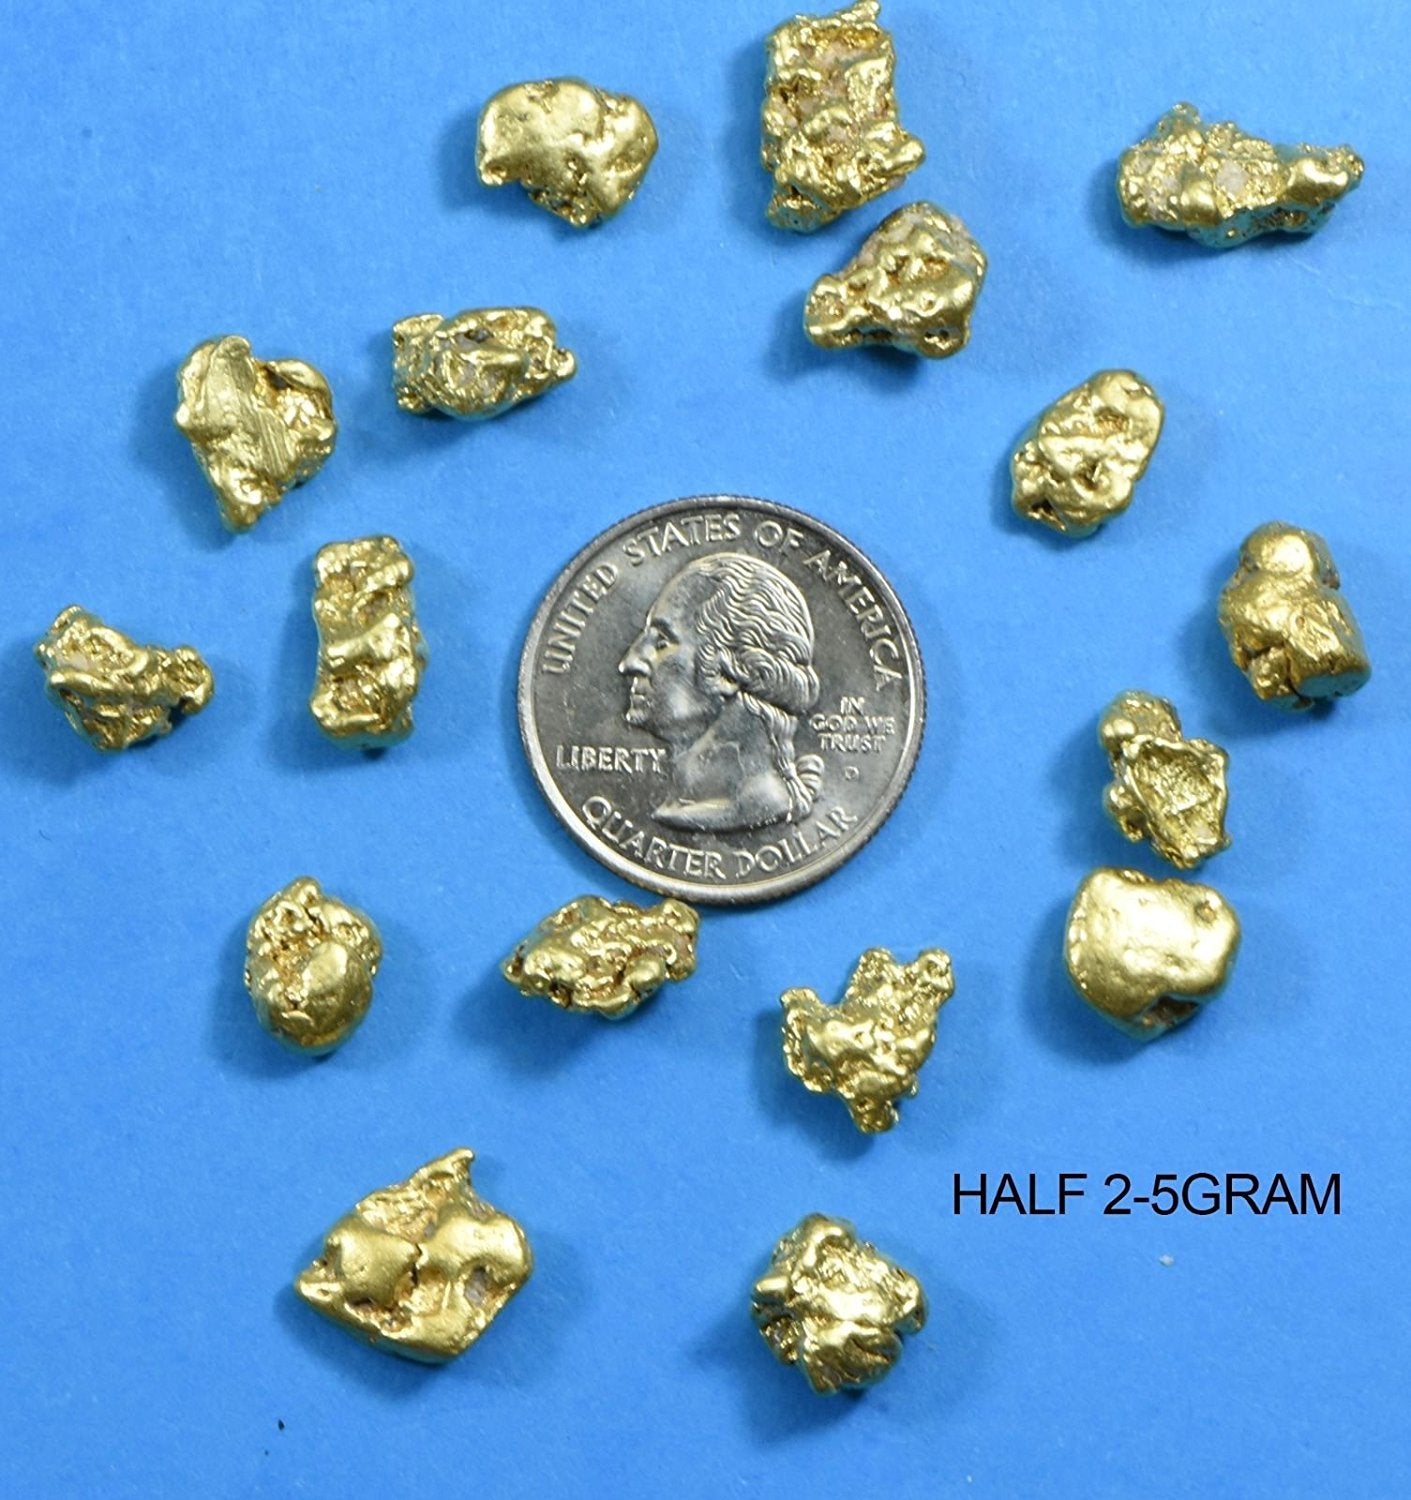 Alaskan BC Natural Gold Nugget 1 Troy Oz. Lot of 5-10 gram Nuggets Gen –  Nuggets By Grant